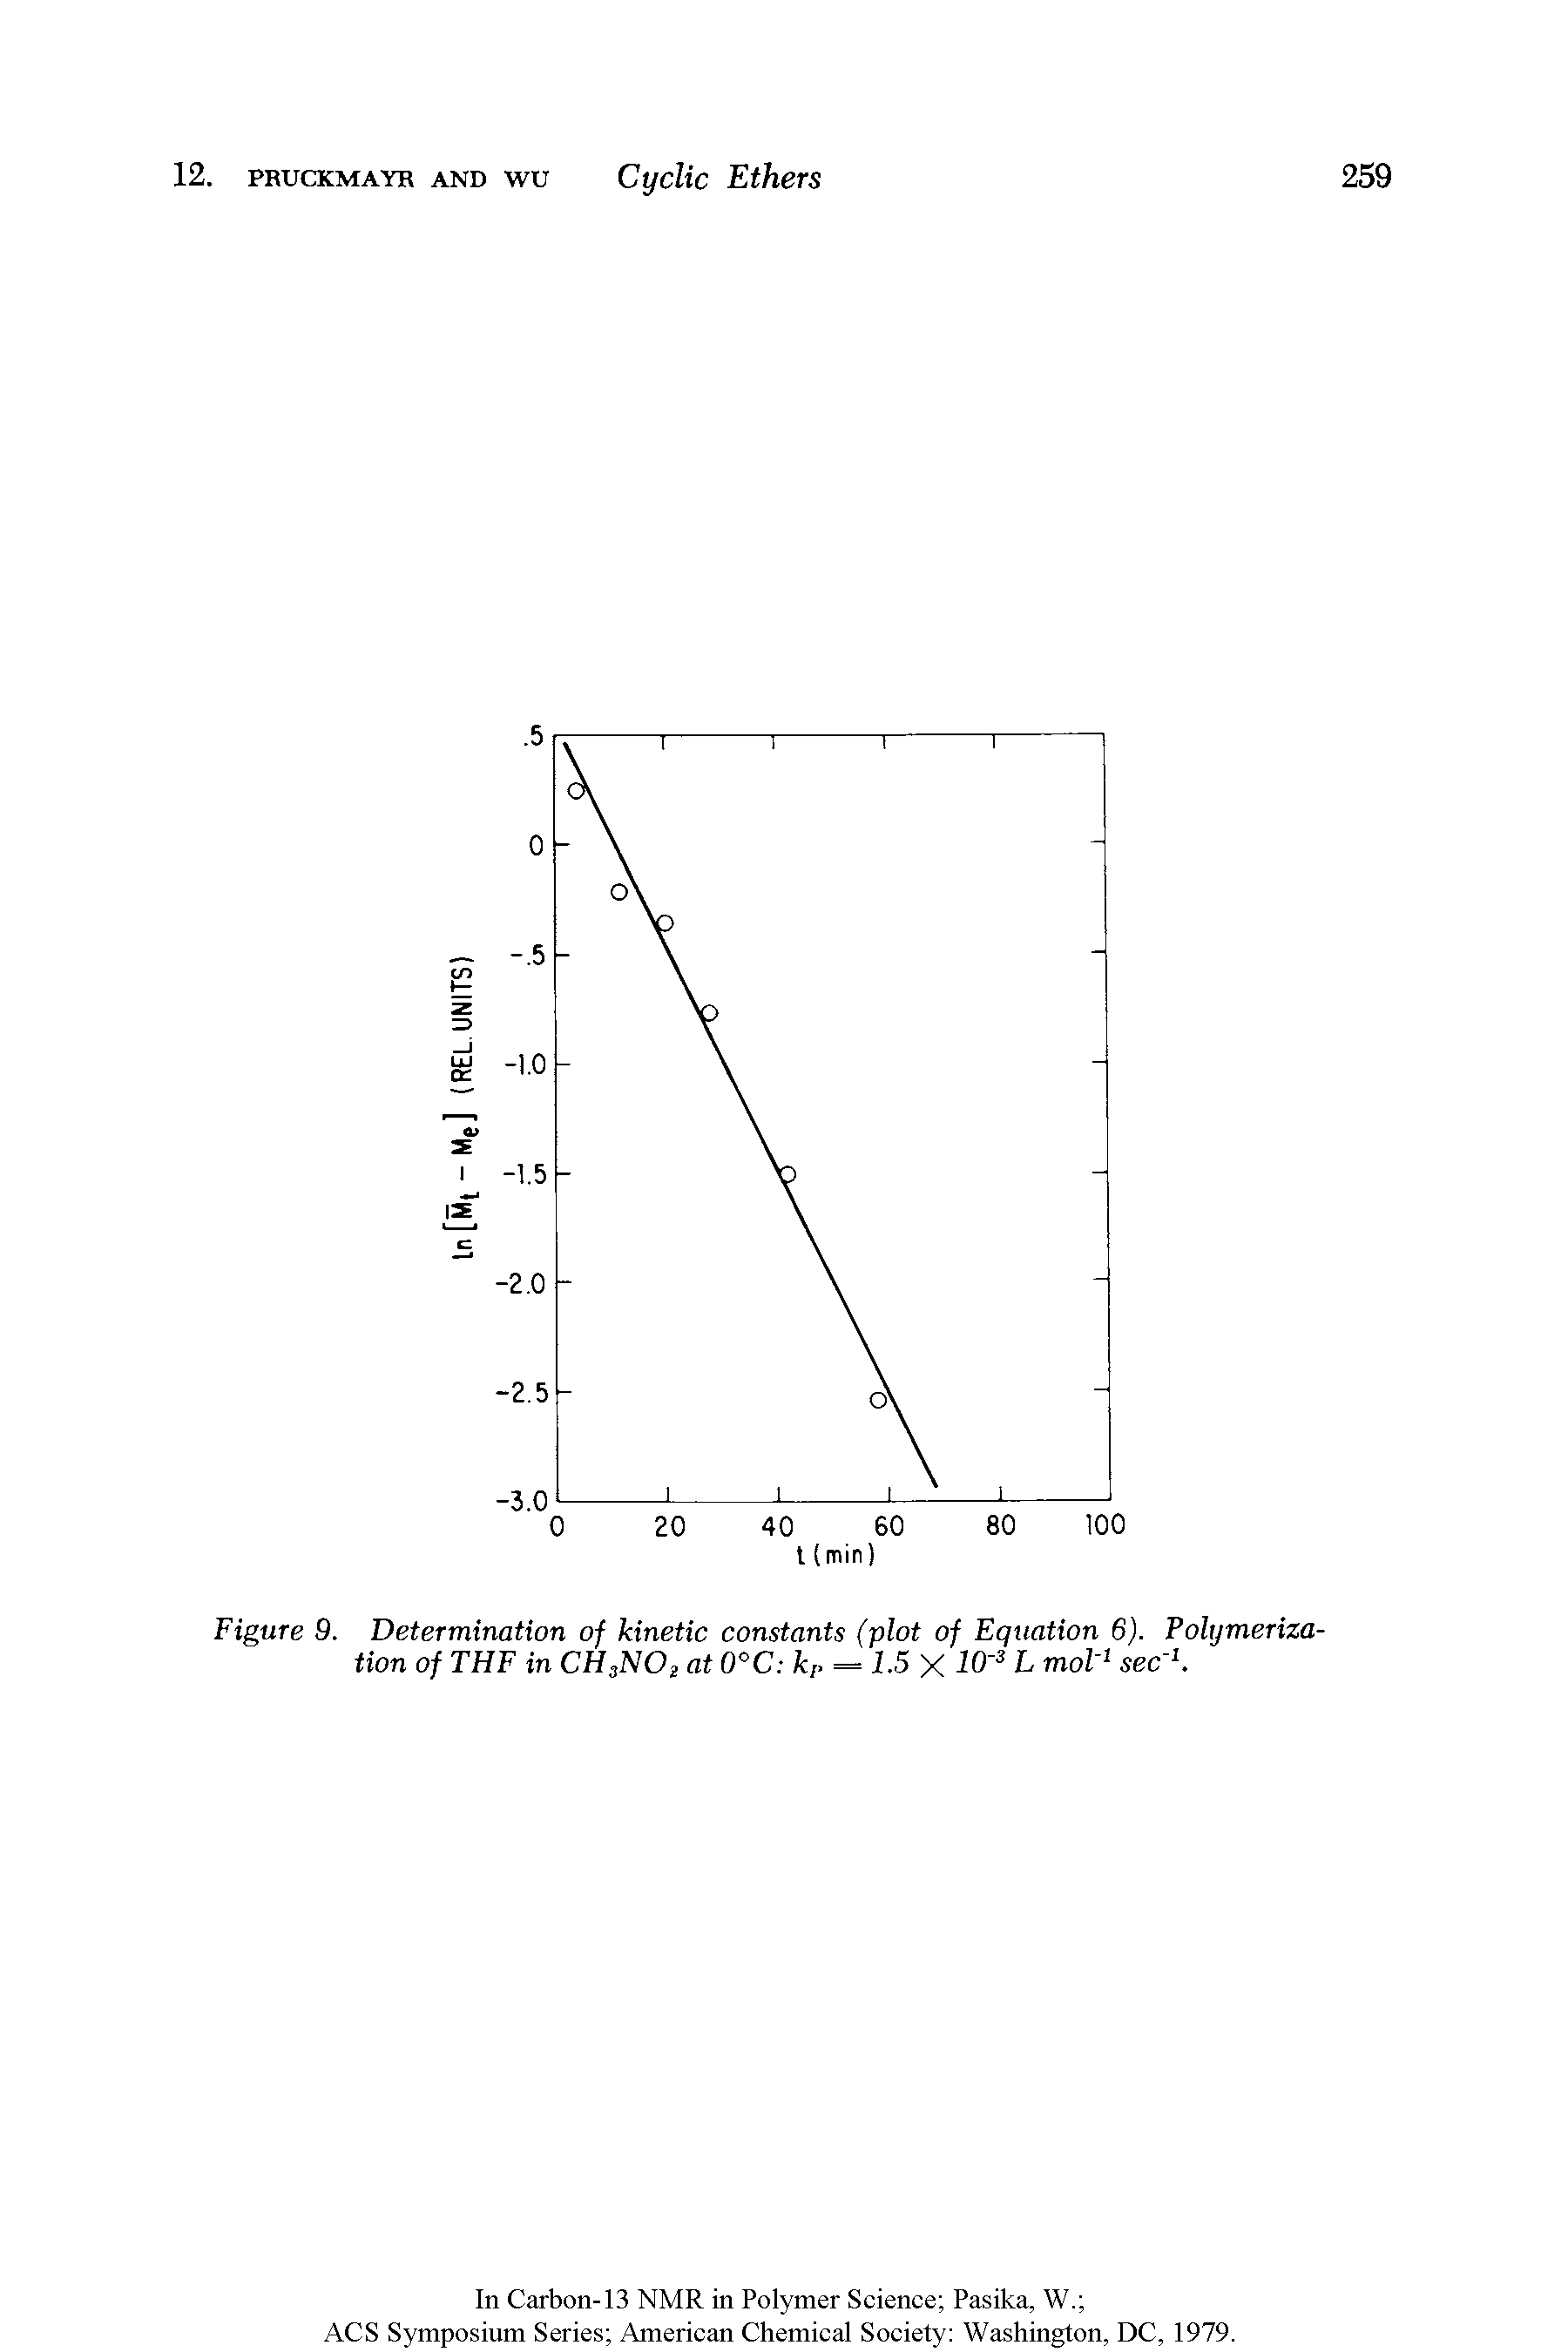 Figure 9. Determination of kinetic constants (plot of Equation 6). Polymerization of THF in CH3NO2 at 0°C kp = 1.5 X 10 k, mol sec. ...